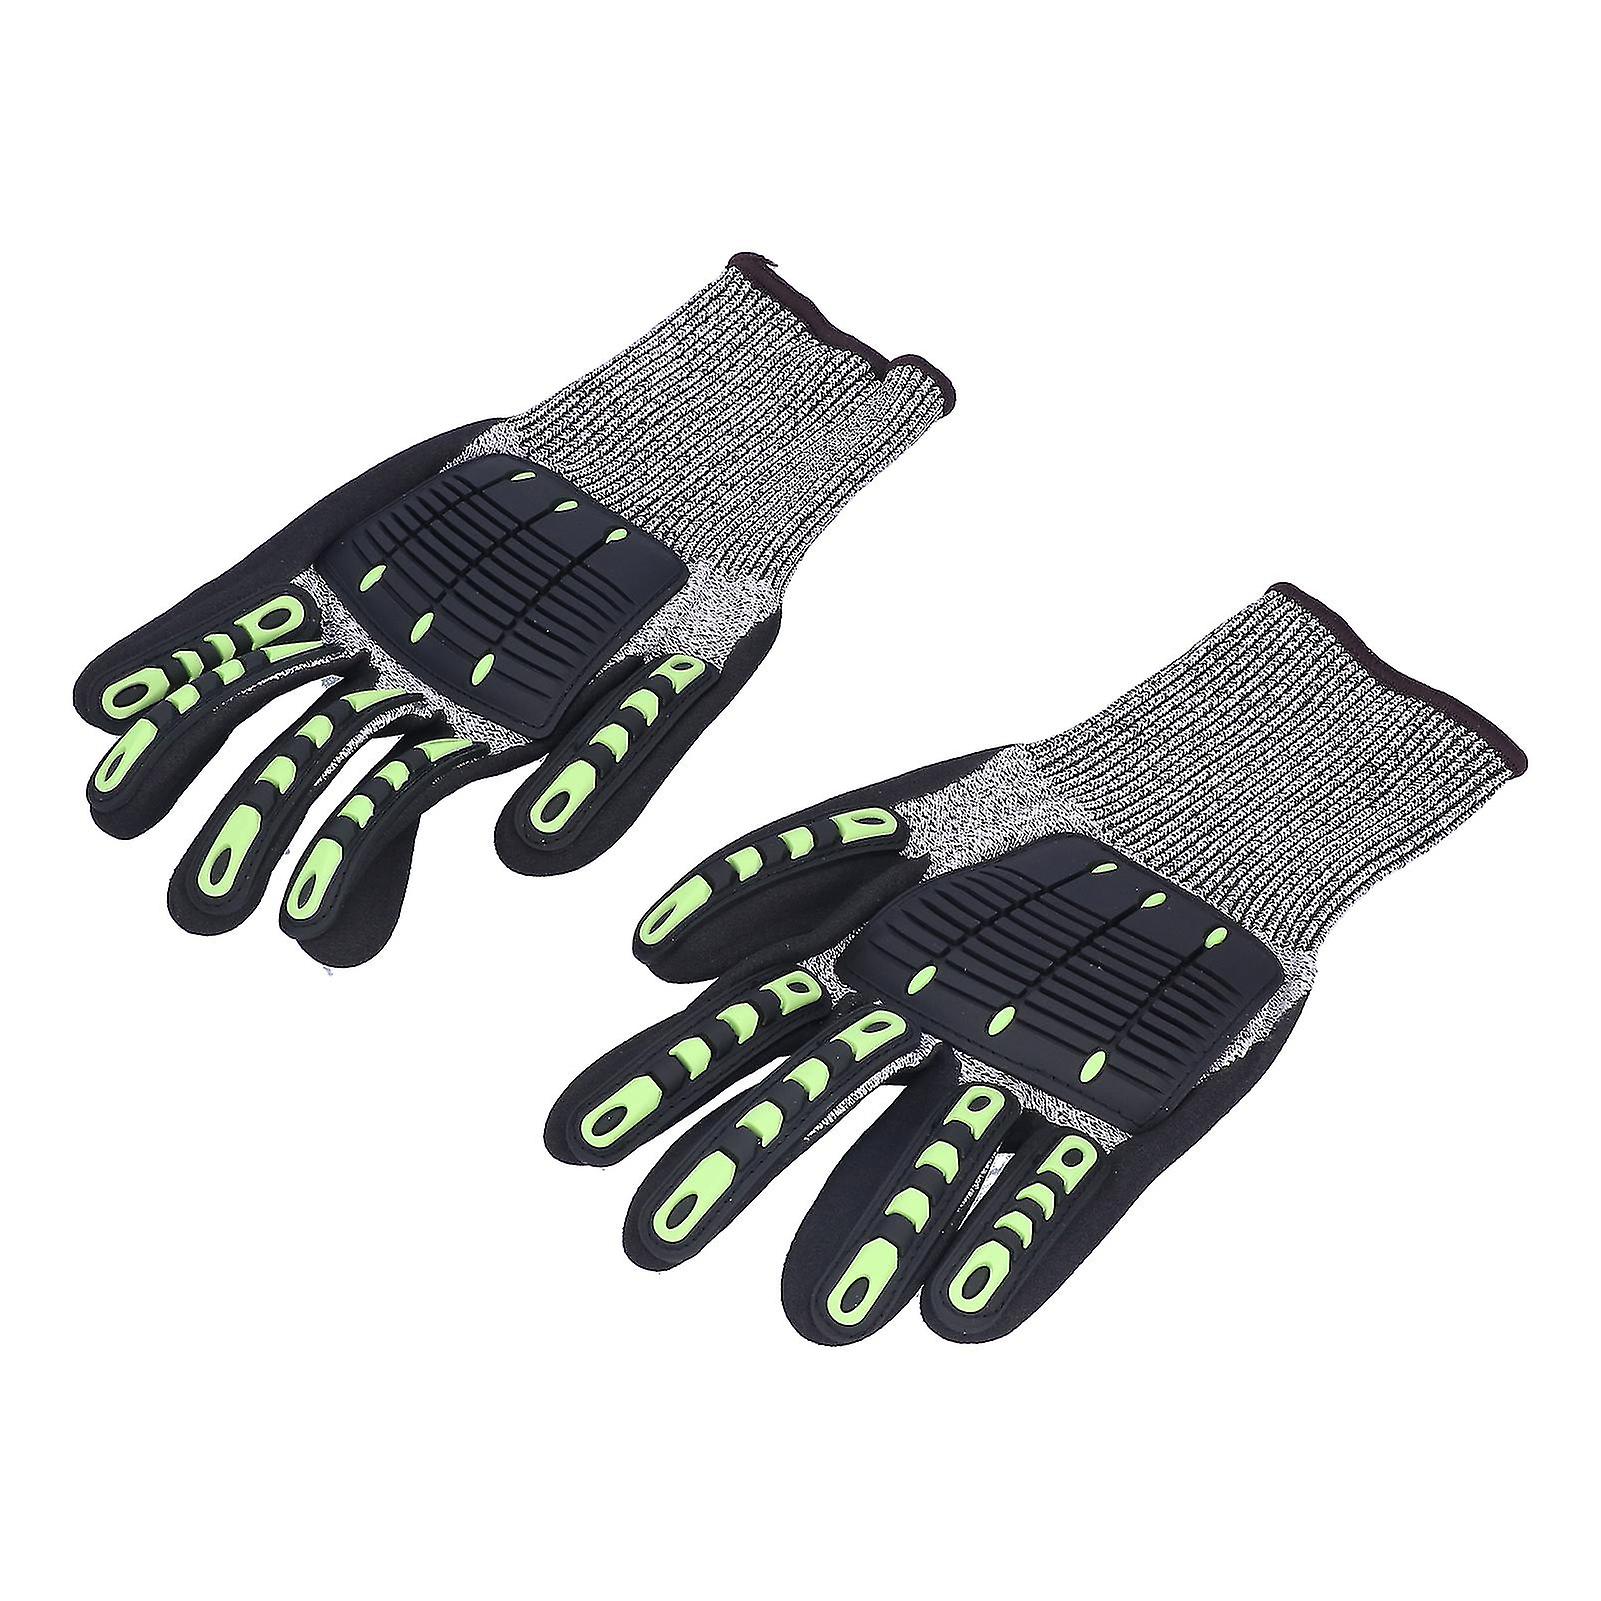 Protective Glove 5 Level Cut Resistant Anti Impact Glove Black Work Glove for Gardening Outdoor